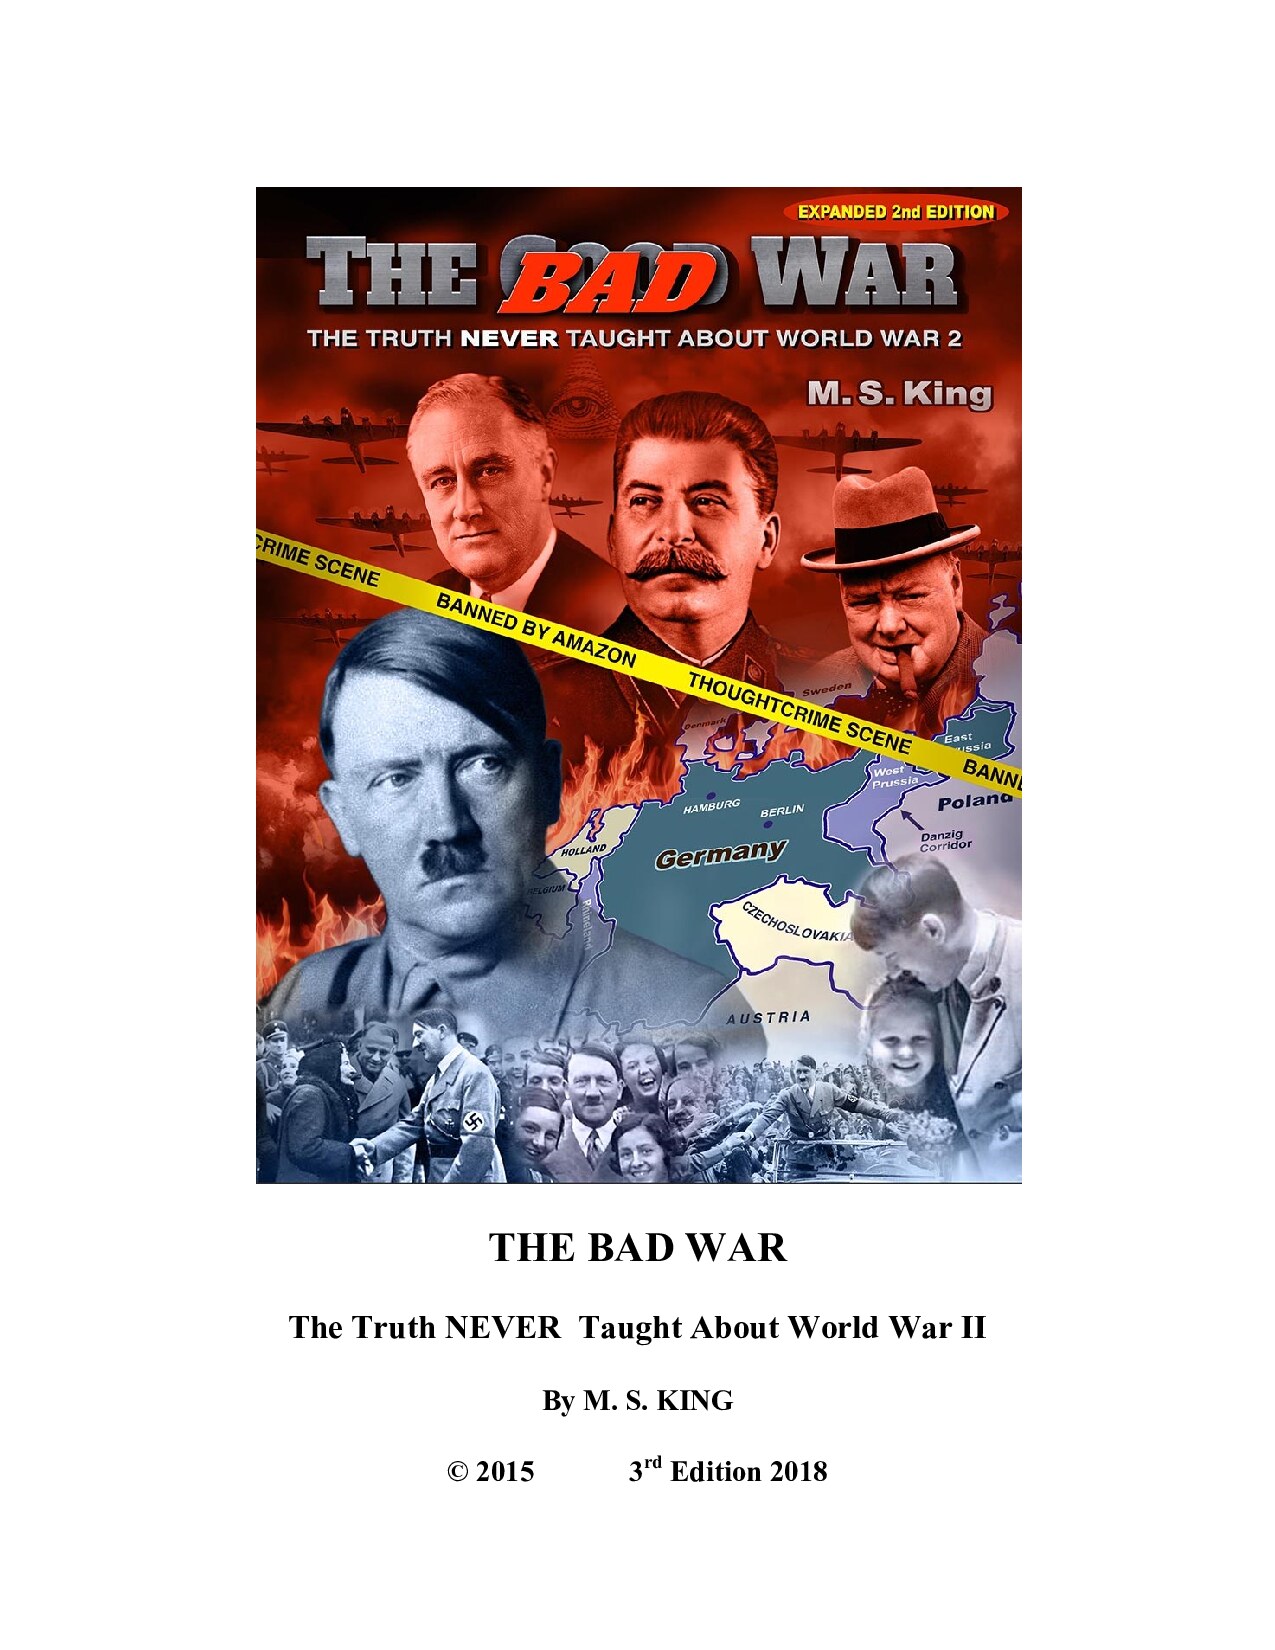 The Bad War: The Truth NEVER Taught About World War II